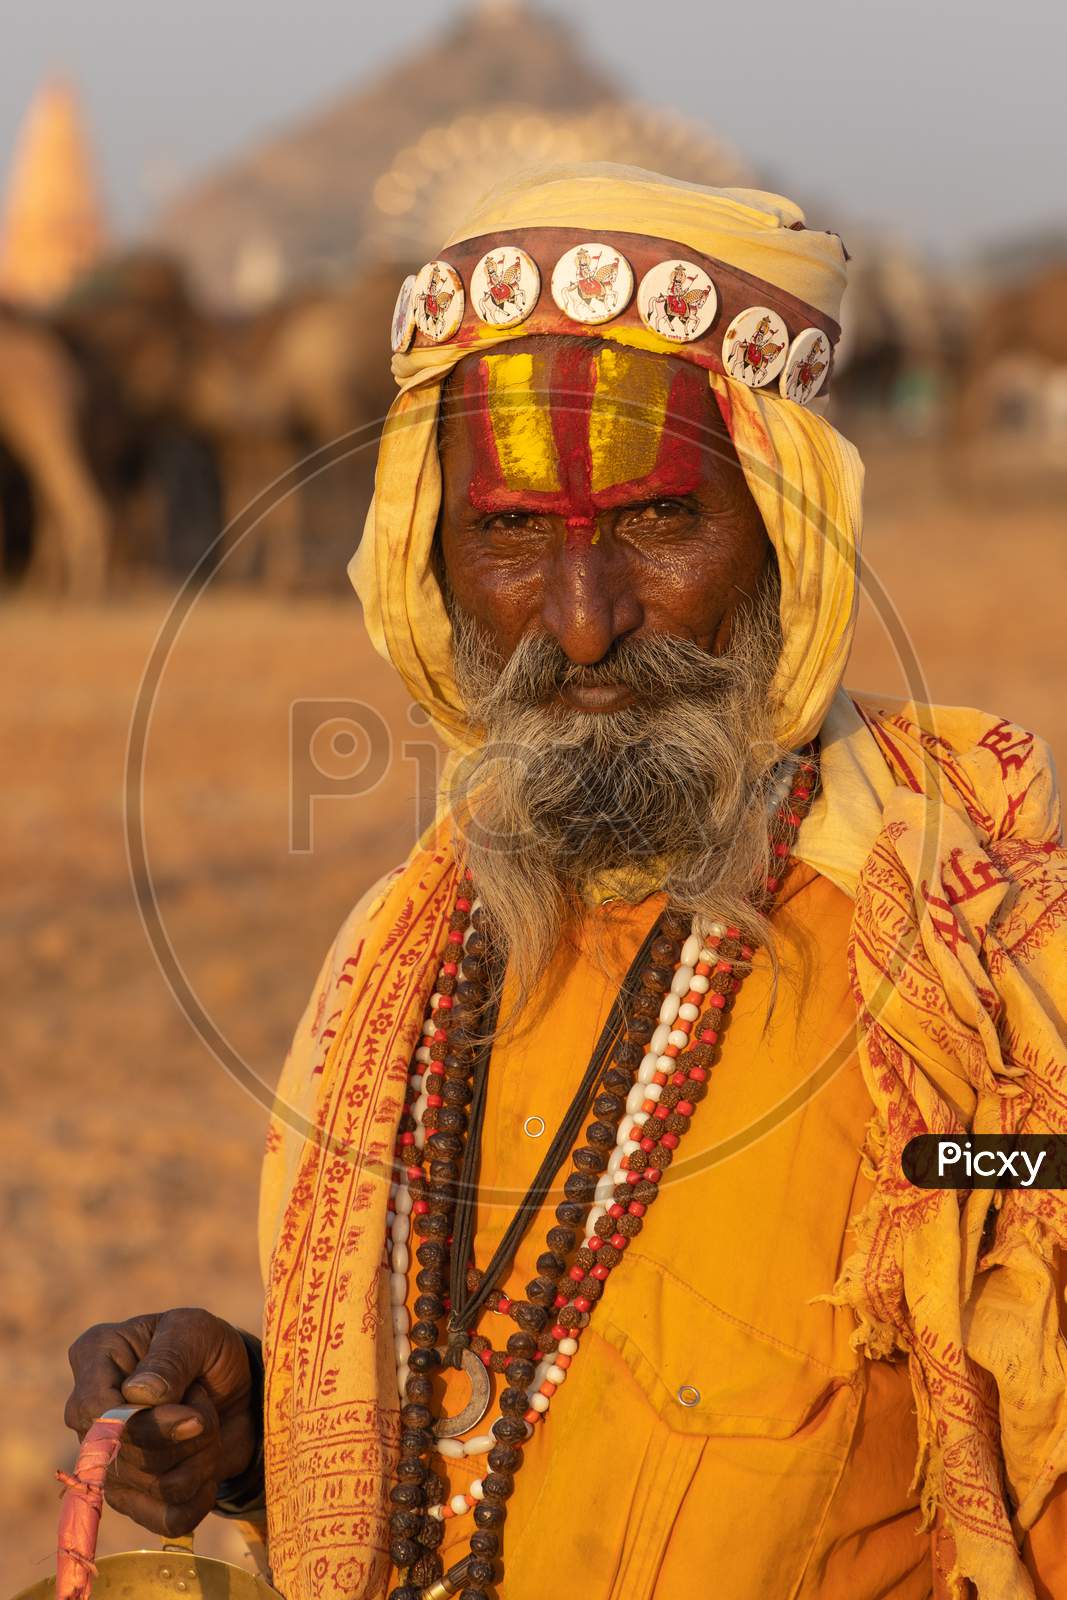 Portrait of a holy person with color on his fore head and beard wearing saffron colored clothes